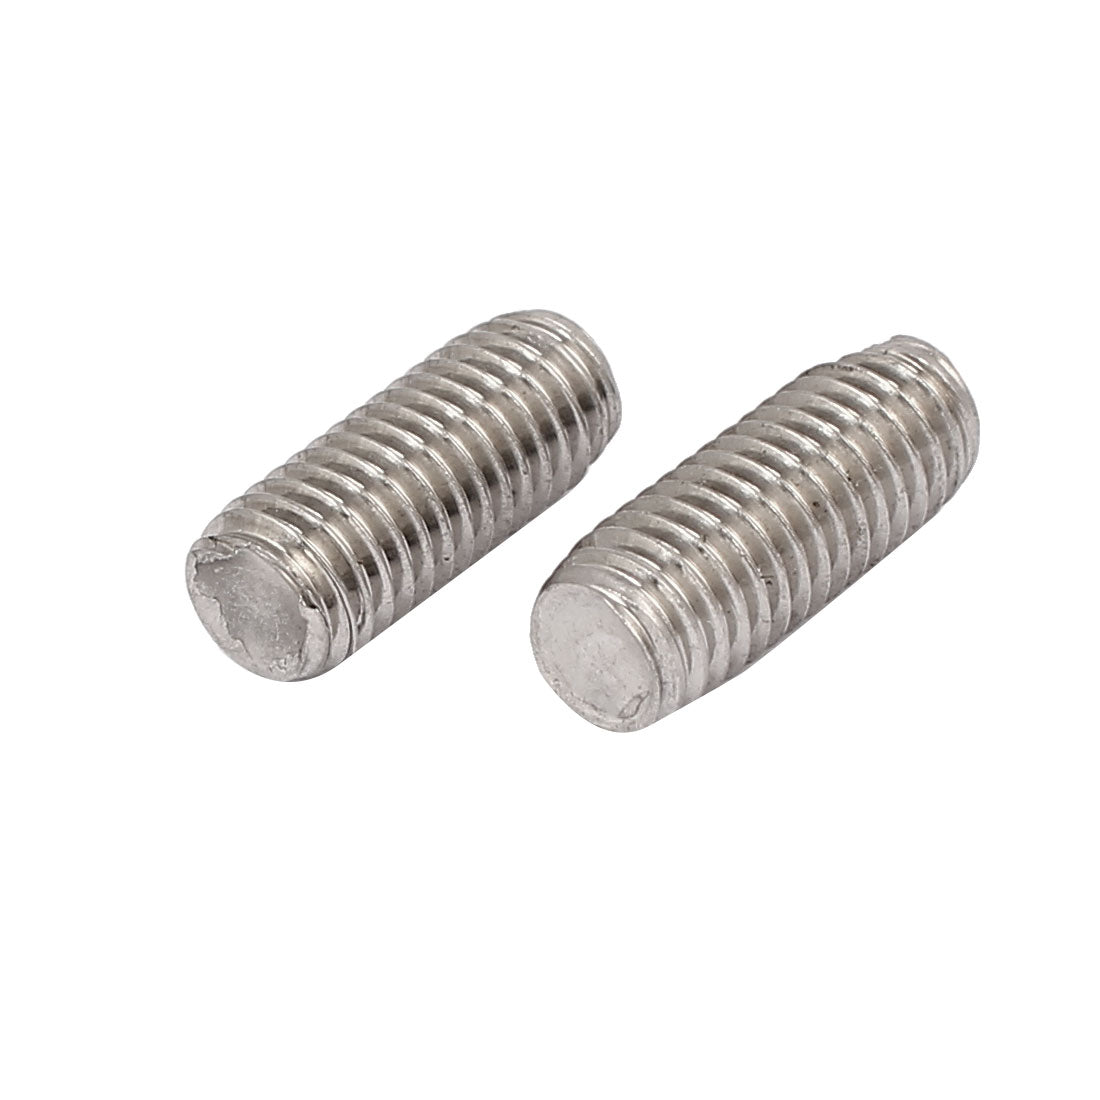 uxcell Uxcell M8 x 20mm 1.25mm Pitch 304 Stainless Steel Fully Threaded Rods Hardware 20 Pcs